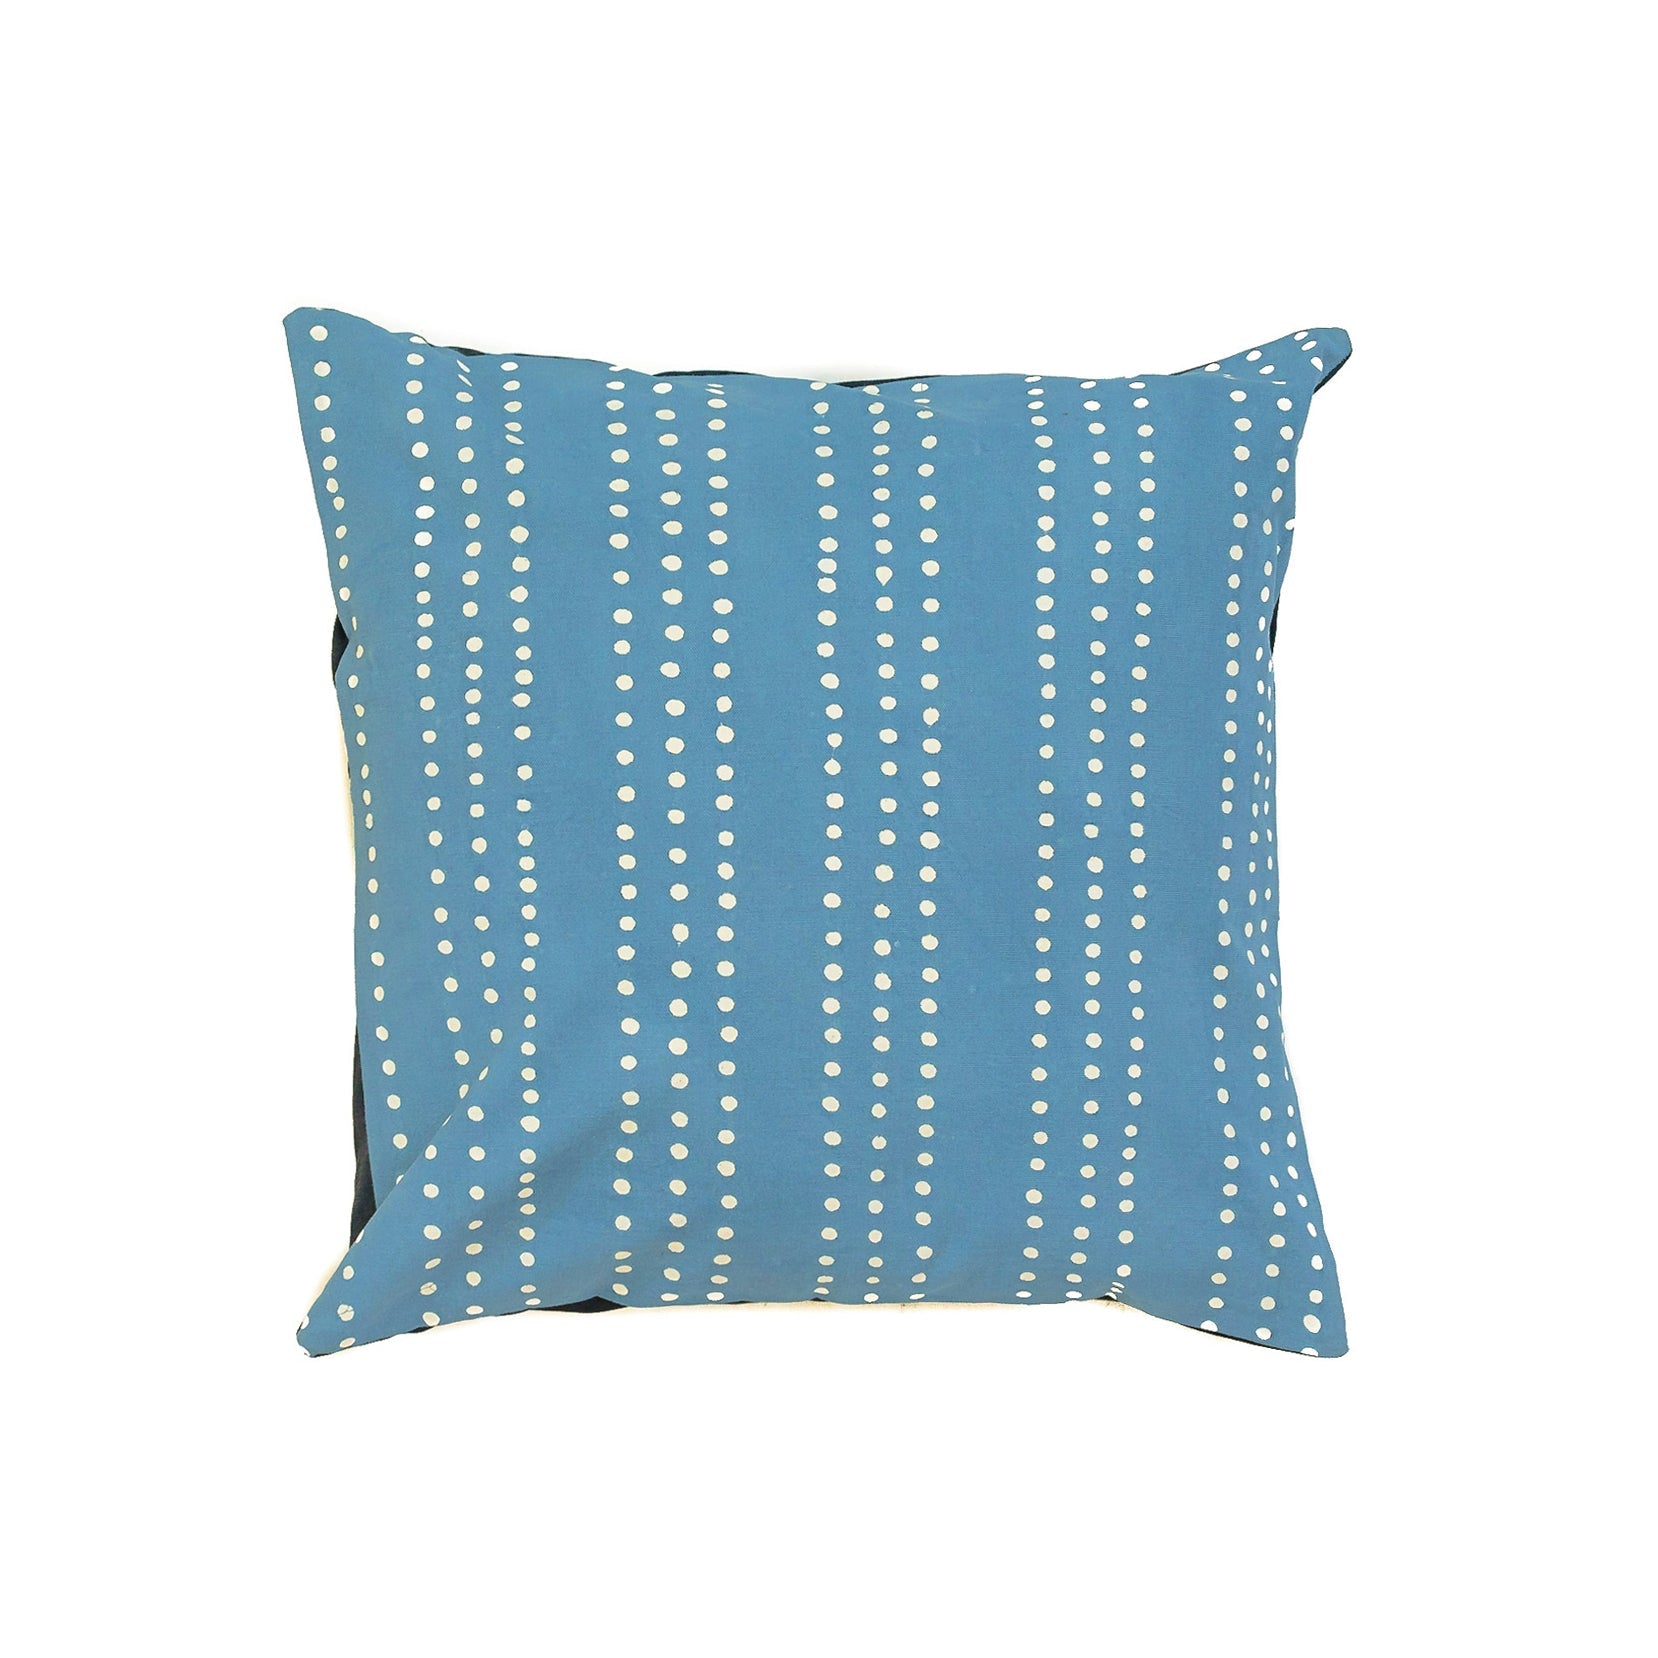 Tribal Cloth Indigo Dots Cushion Cover - Handmade by TRIBAL TEXTILES - Handcrafted Home Decor Interiors - African Made